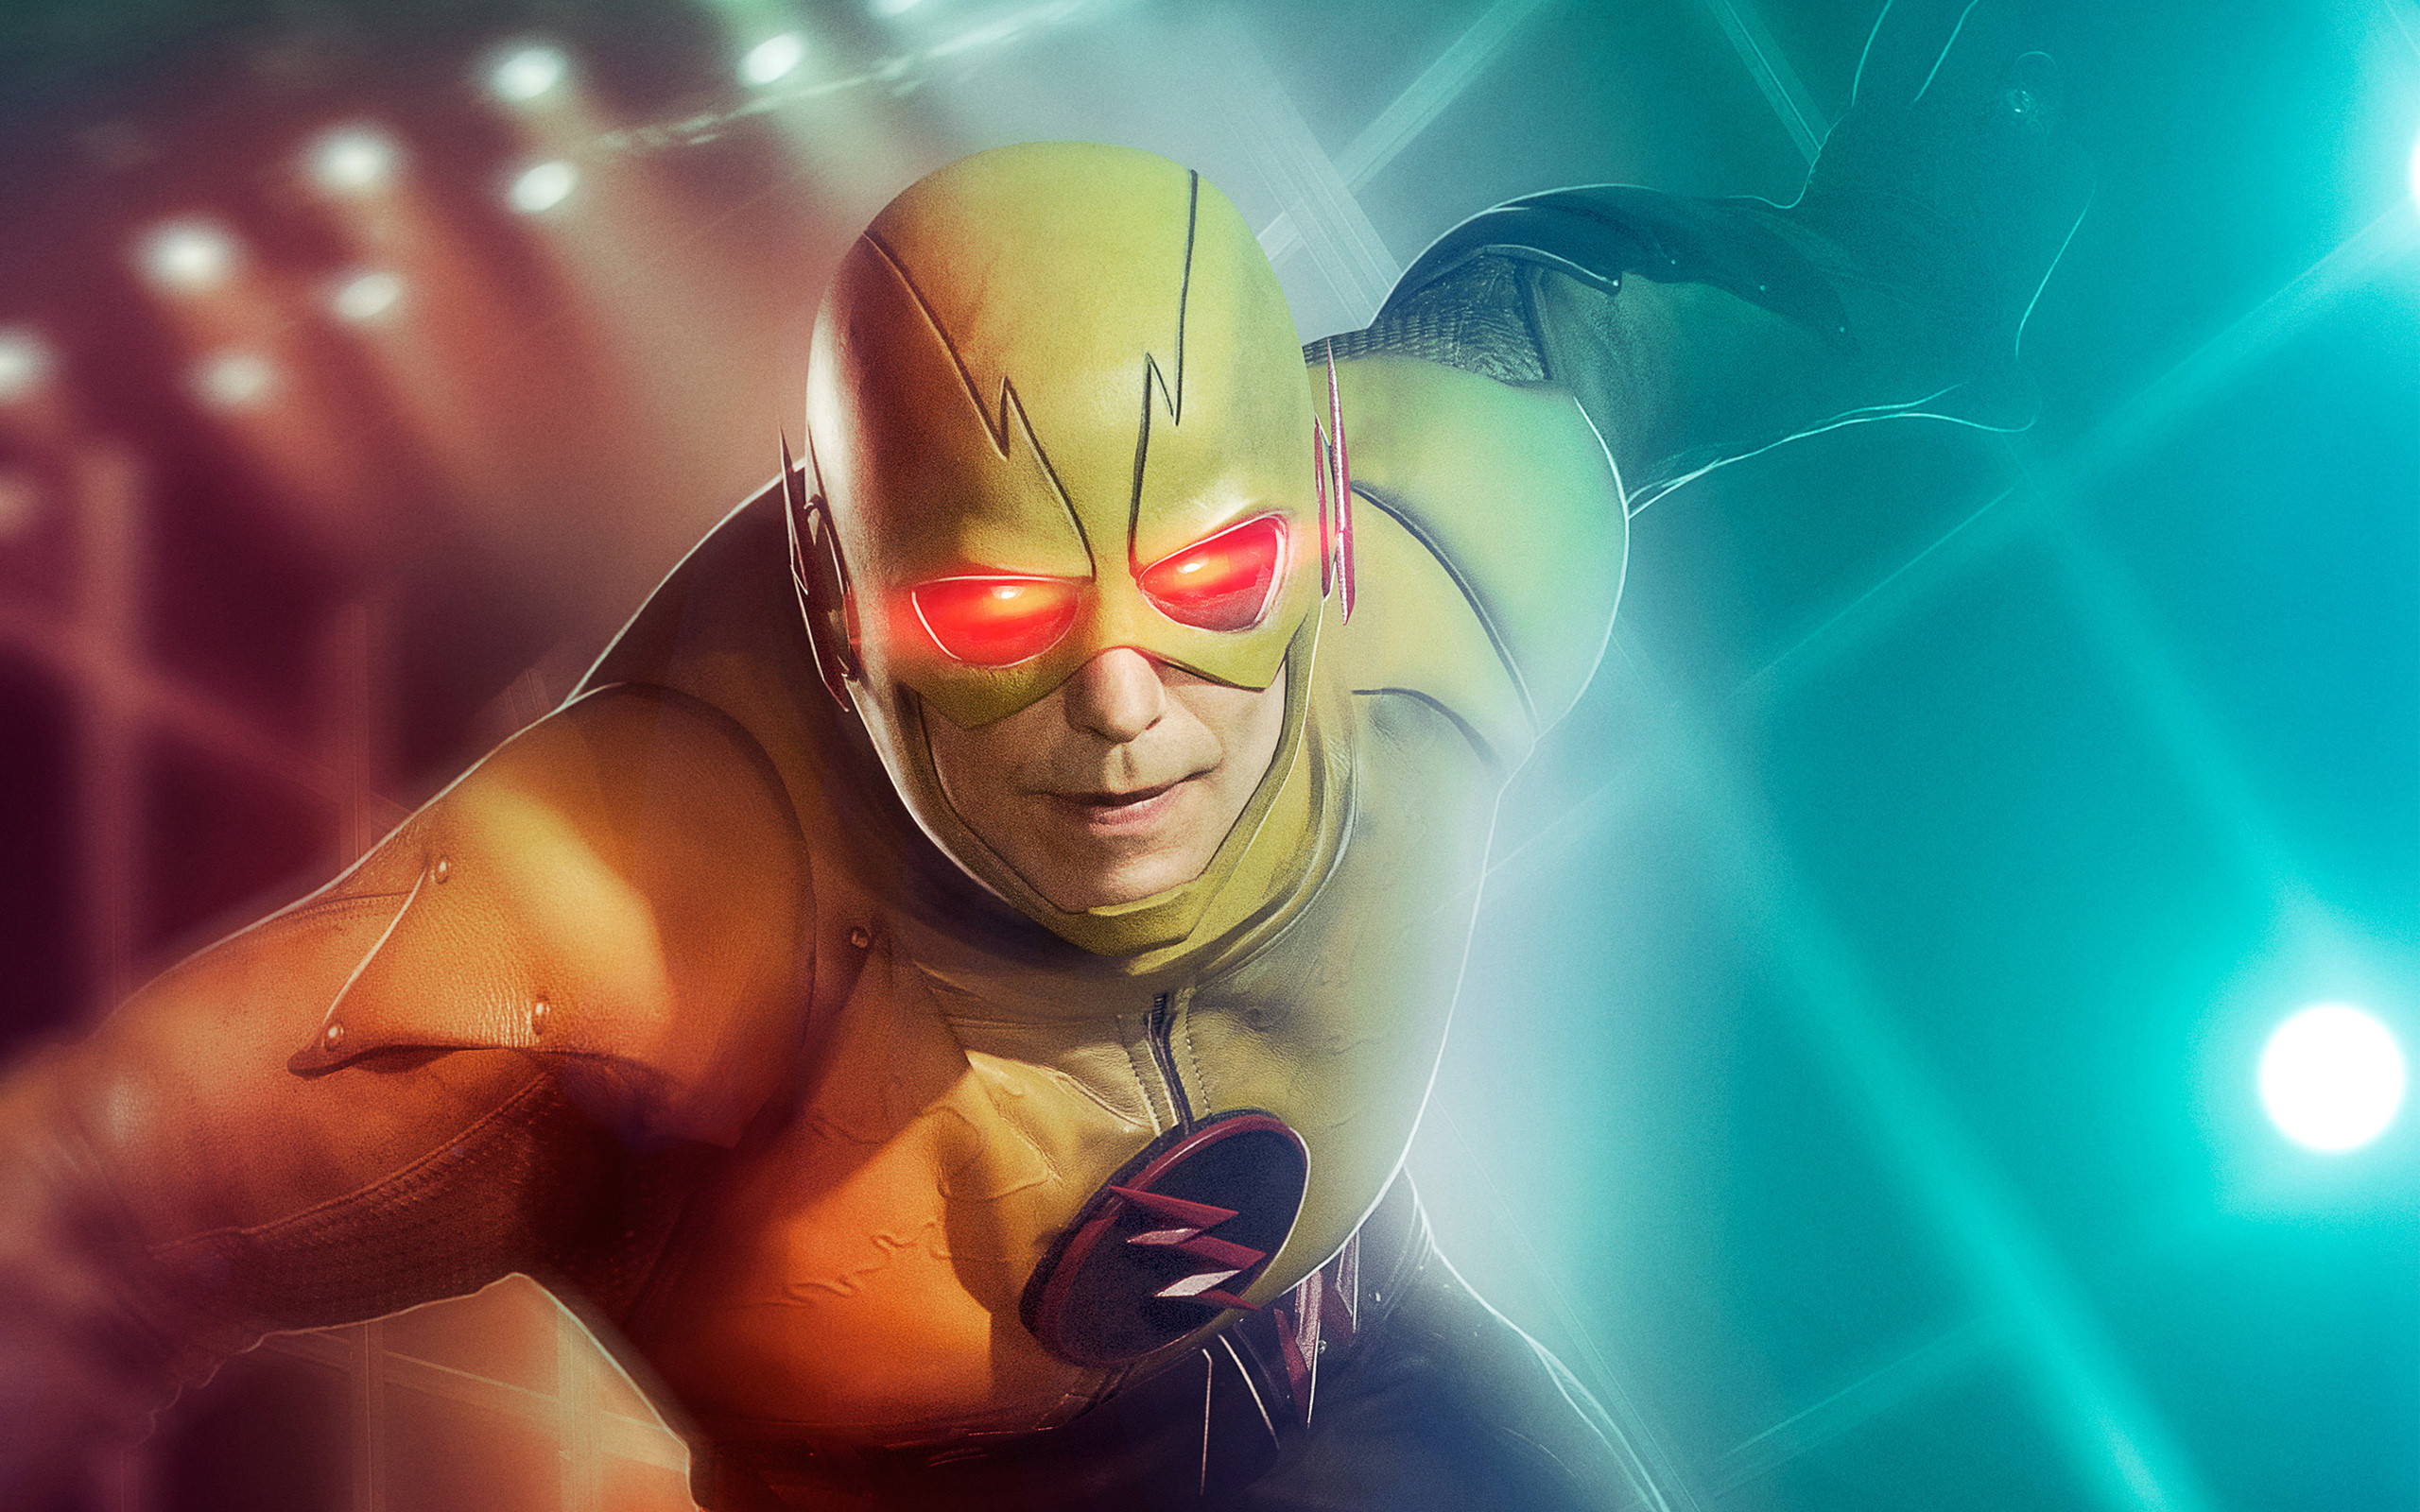 HD Wallpaper Background ID615282. TV Show The Flash